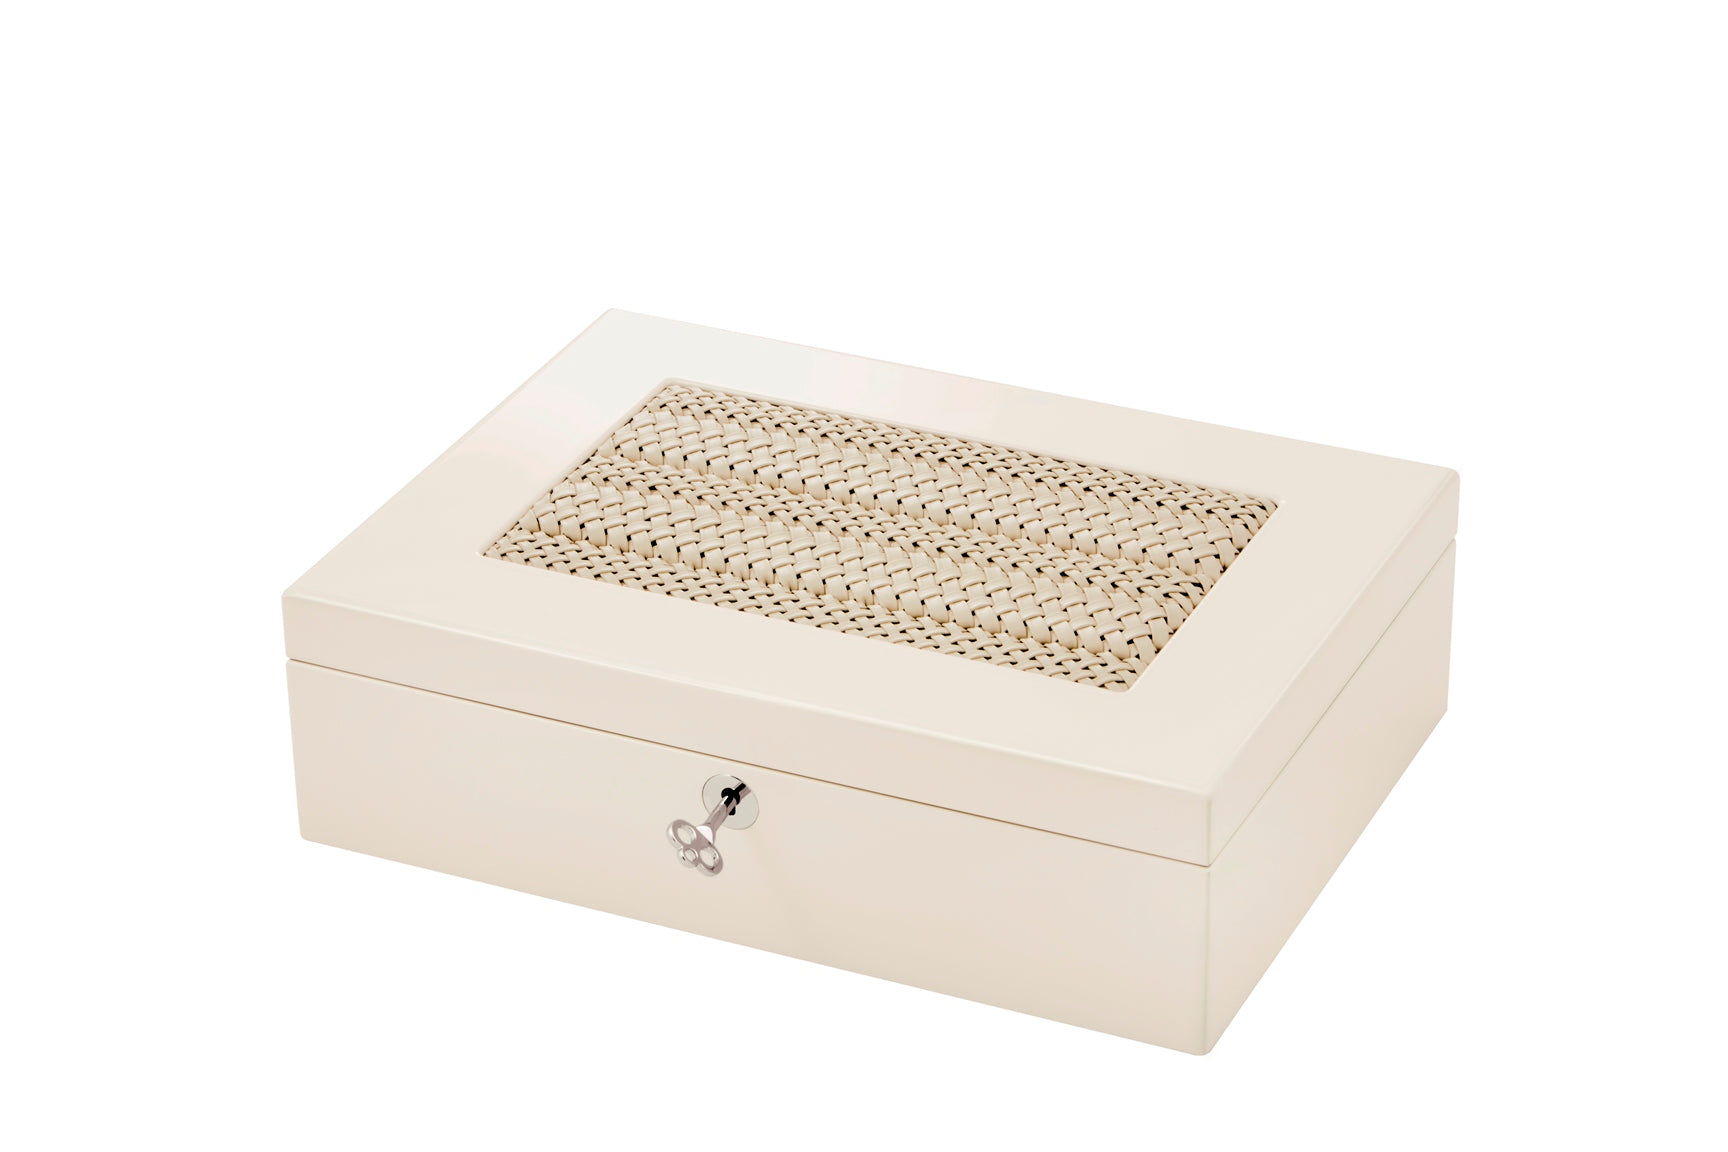 Riviere Rieti Lacquered Wood Jewellery Box with Hand-Braided Leather Inlay | Elegant Design with Hand-Braided Leather Detailing | Suede Lining for Added Luxury | Explore a Range of Luxury Jewellery Boxes at 2Jour Concierge, #1 luxury high-end gift & lifestyle shop